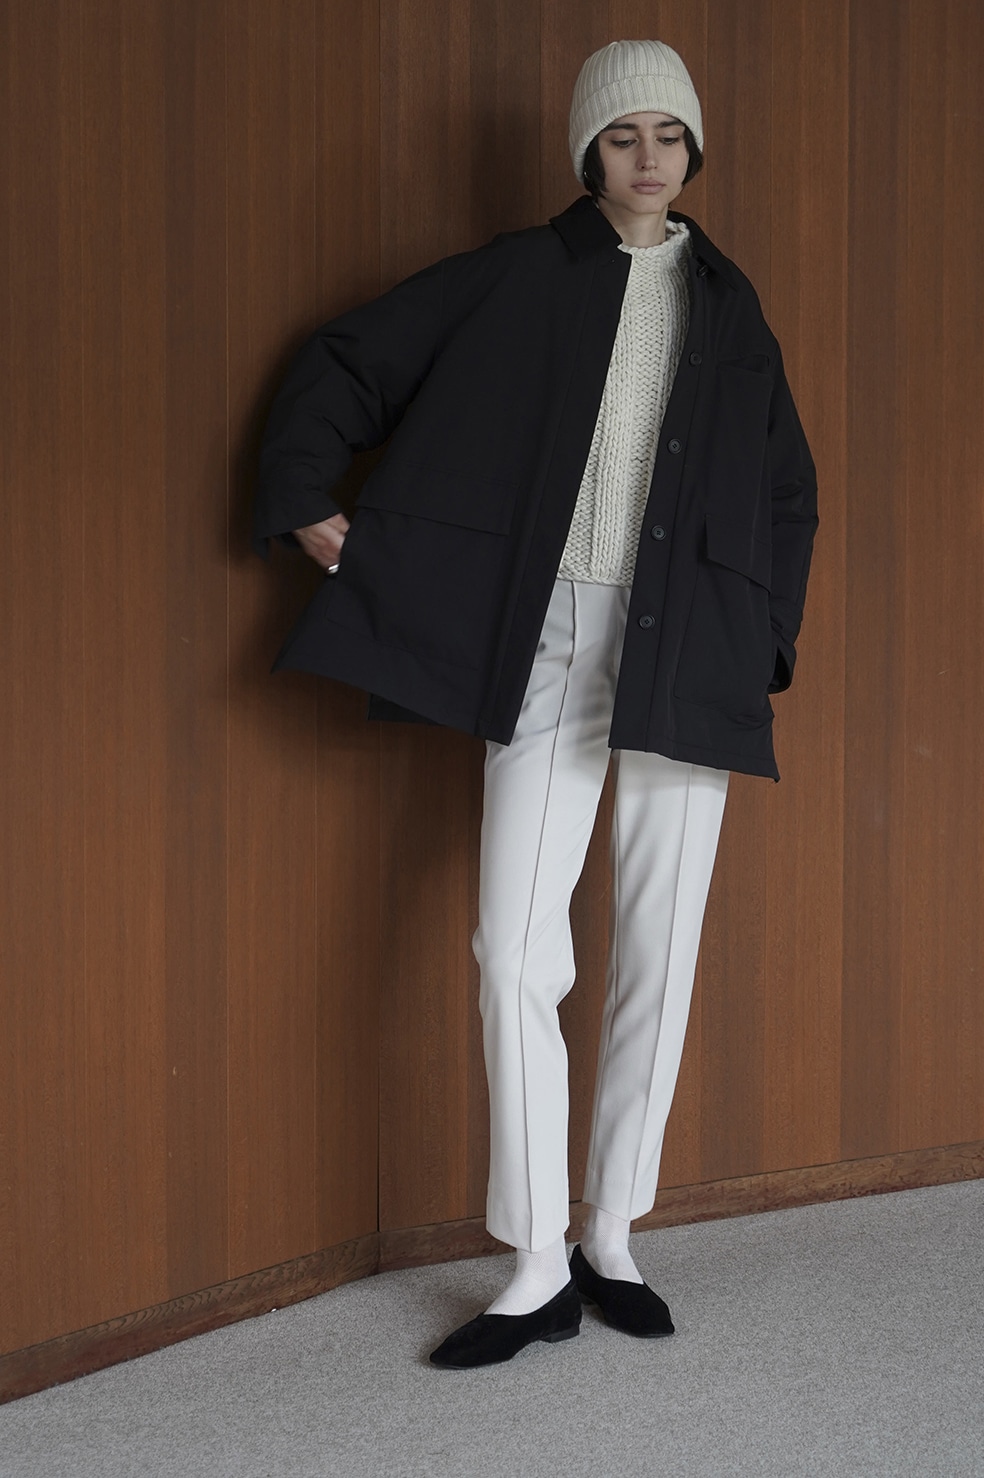 OVER QUILTING HUNTING JACKET｜OUTER(アウター)｜CLANE OFFICIAL